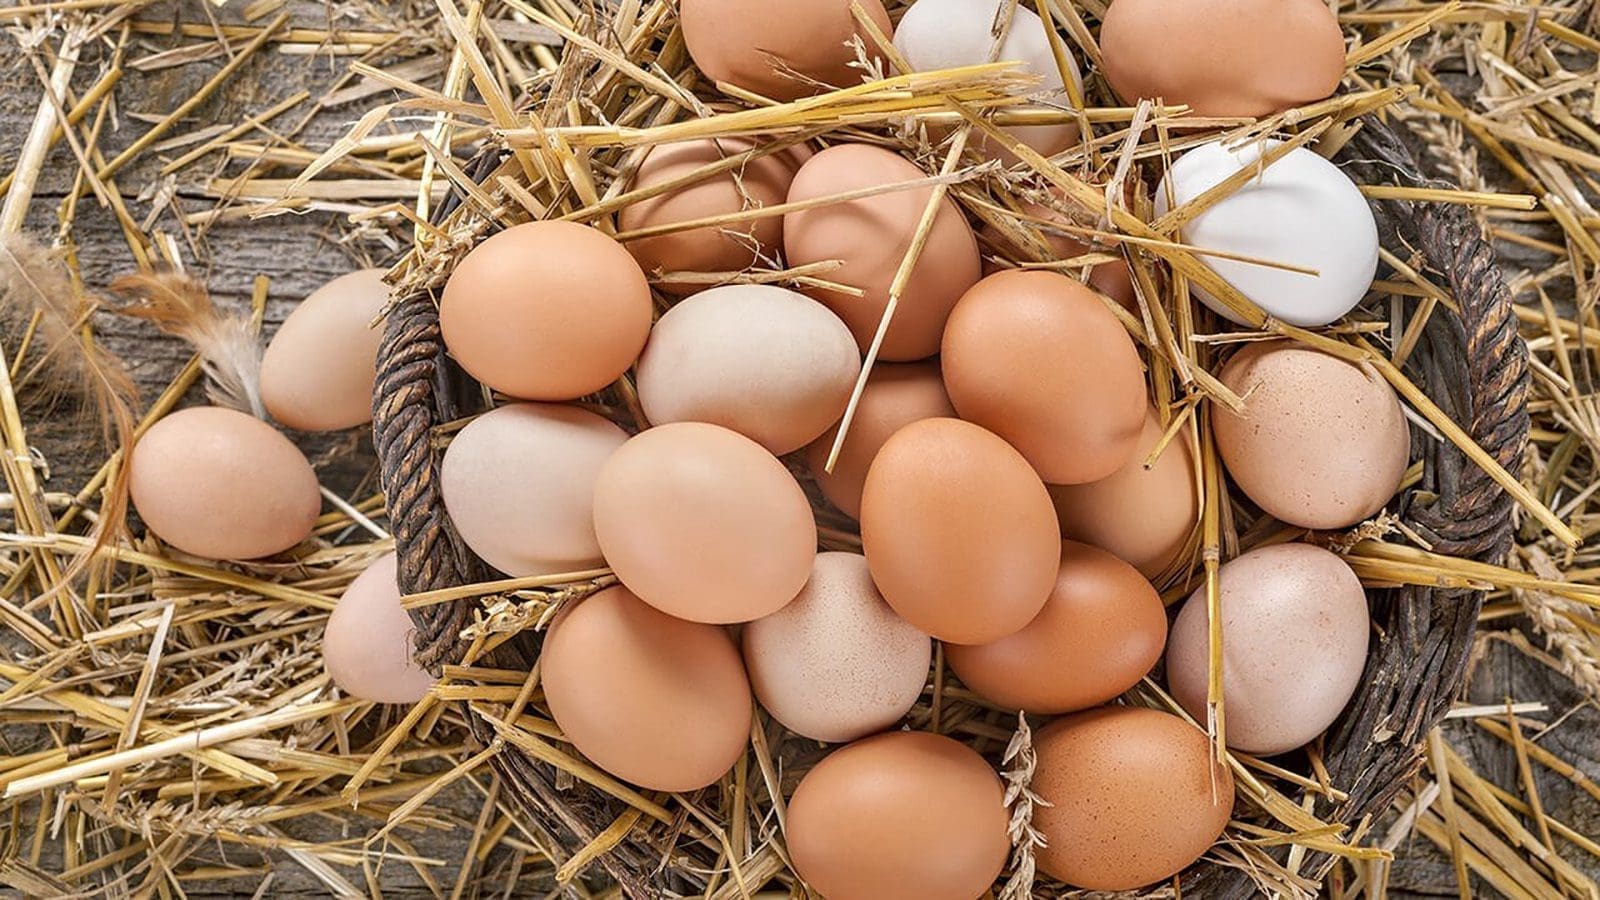 Amazon Fresh transitions to 100% cage-free eggs in bid to boost animal welfare